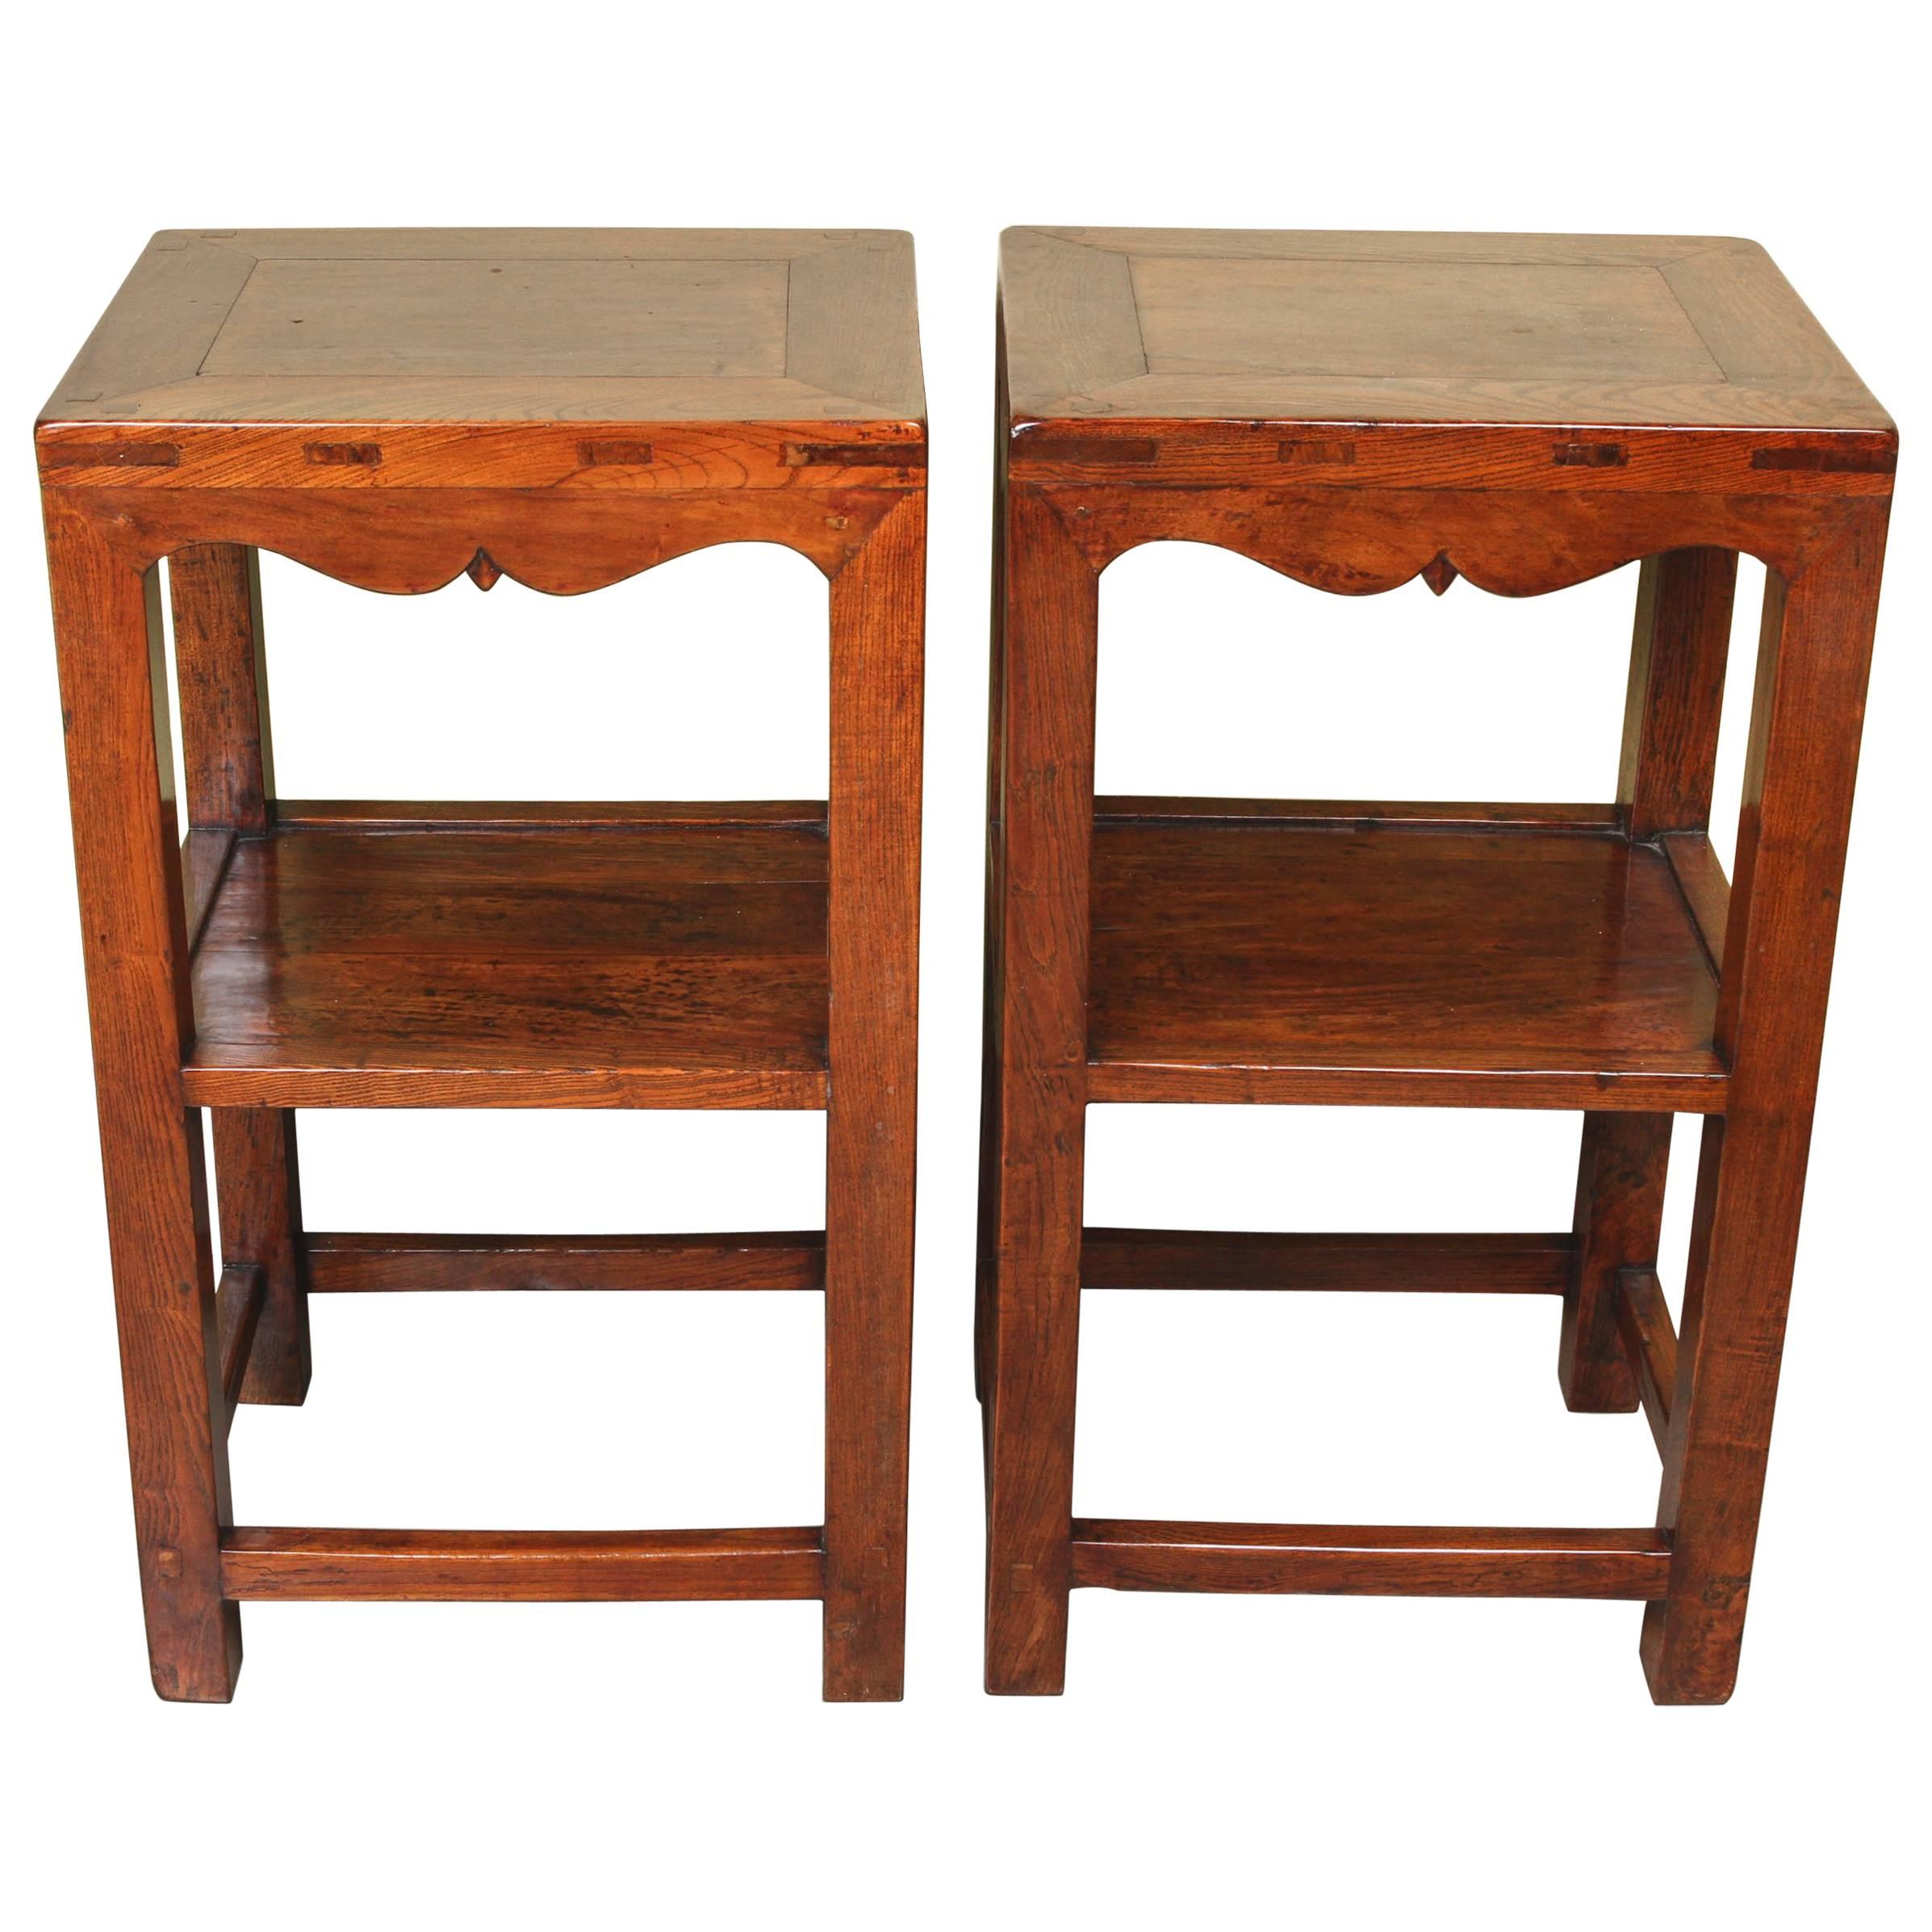 Pair of Chinese Elmwood Stands, 19th Century